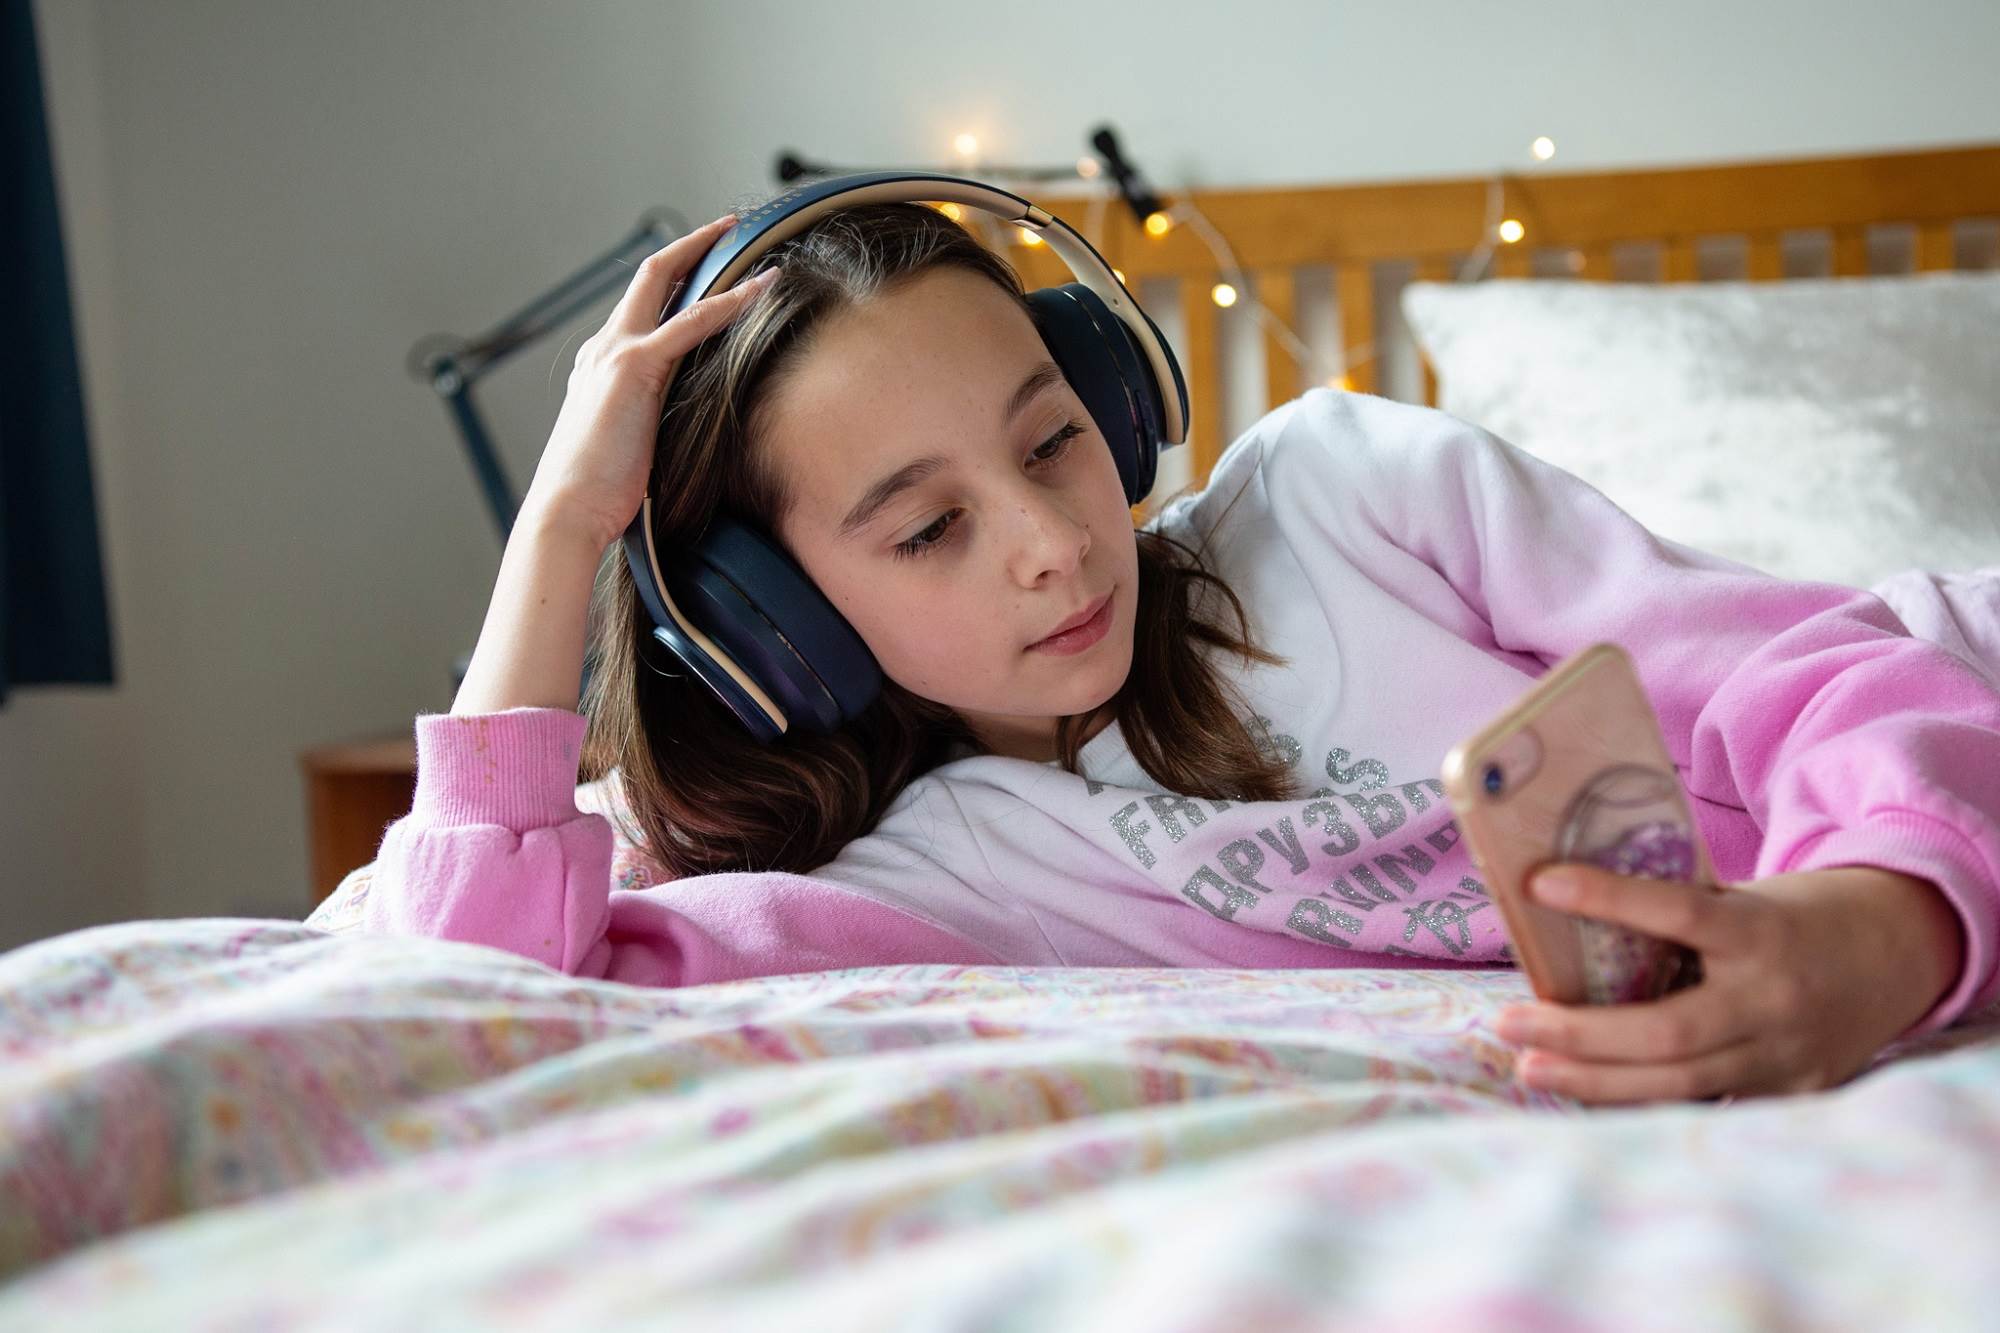 Young Girl Listens To Music On Phone While Reading Online Content